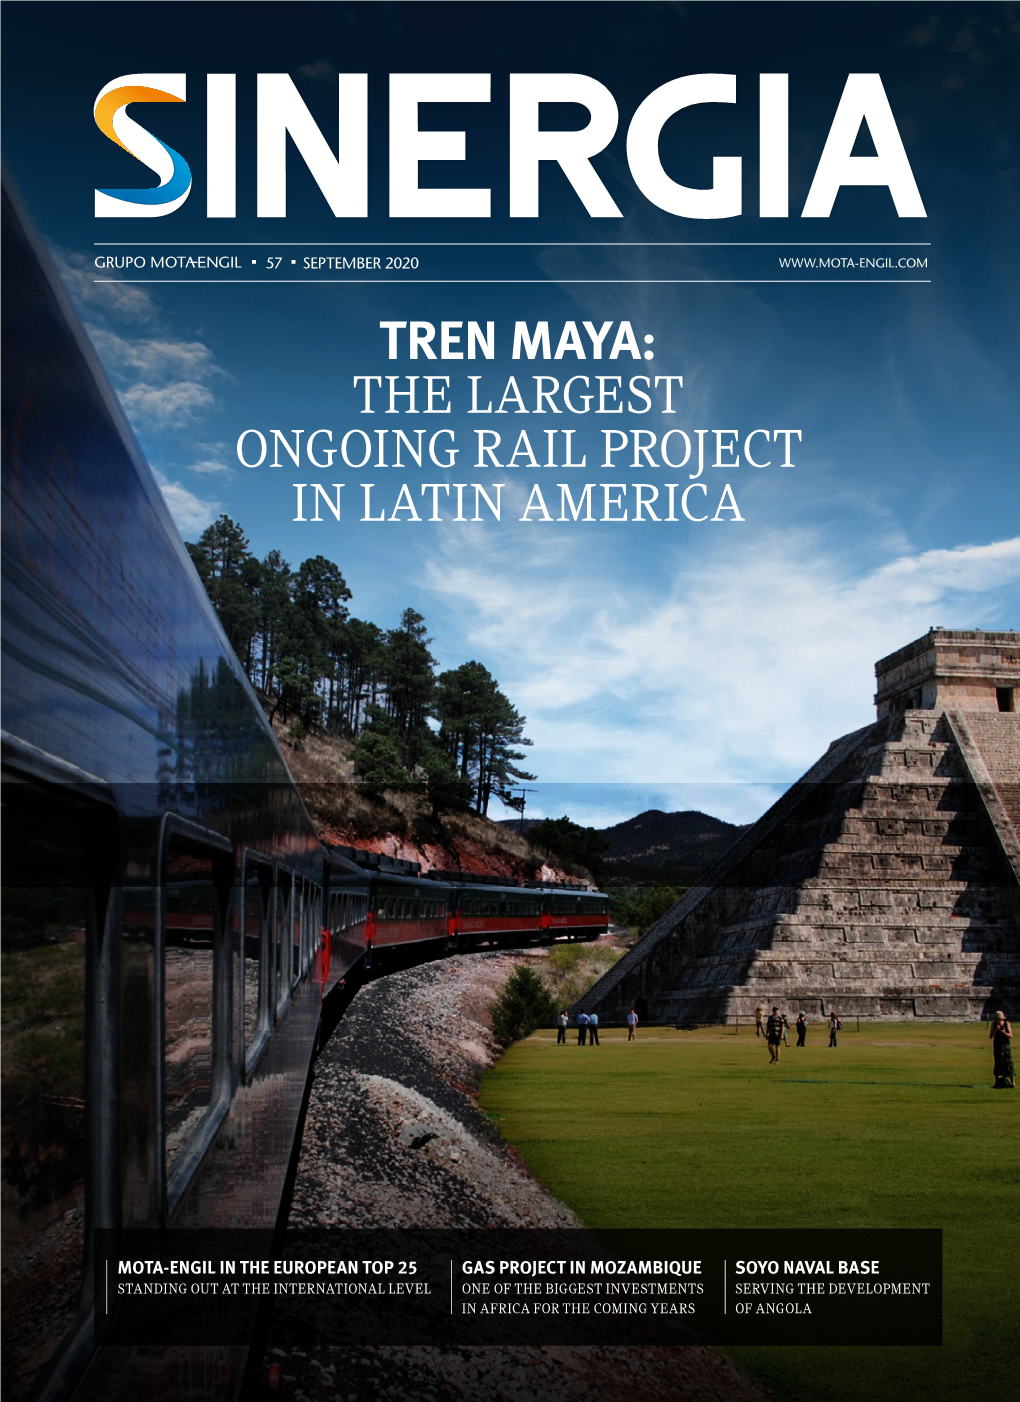 Tren Maya: the Largest Ongoing Rail Project in Latin America